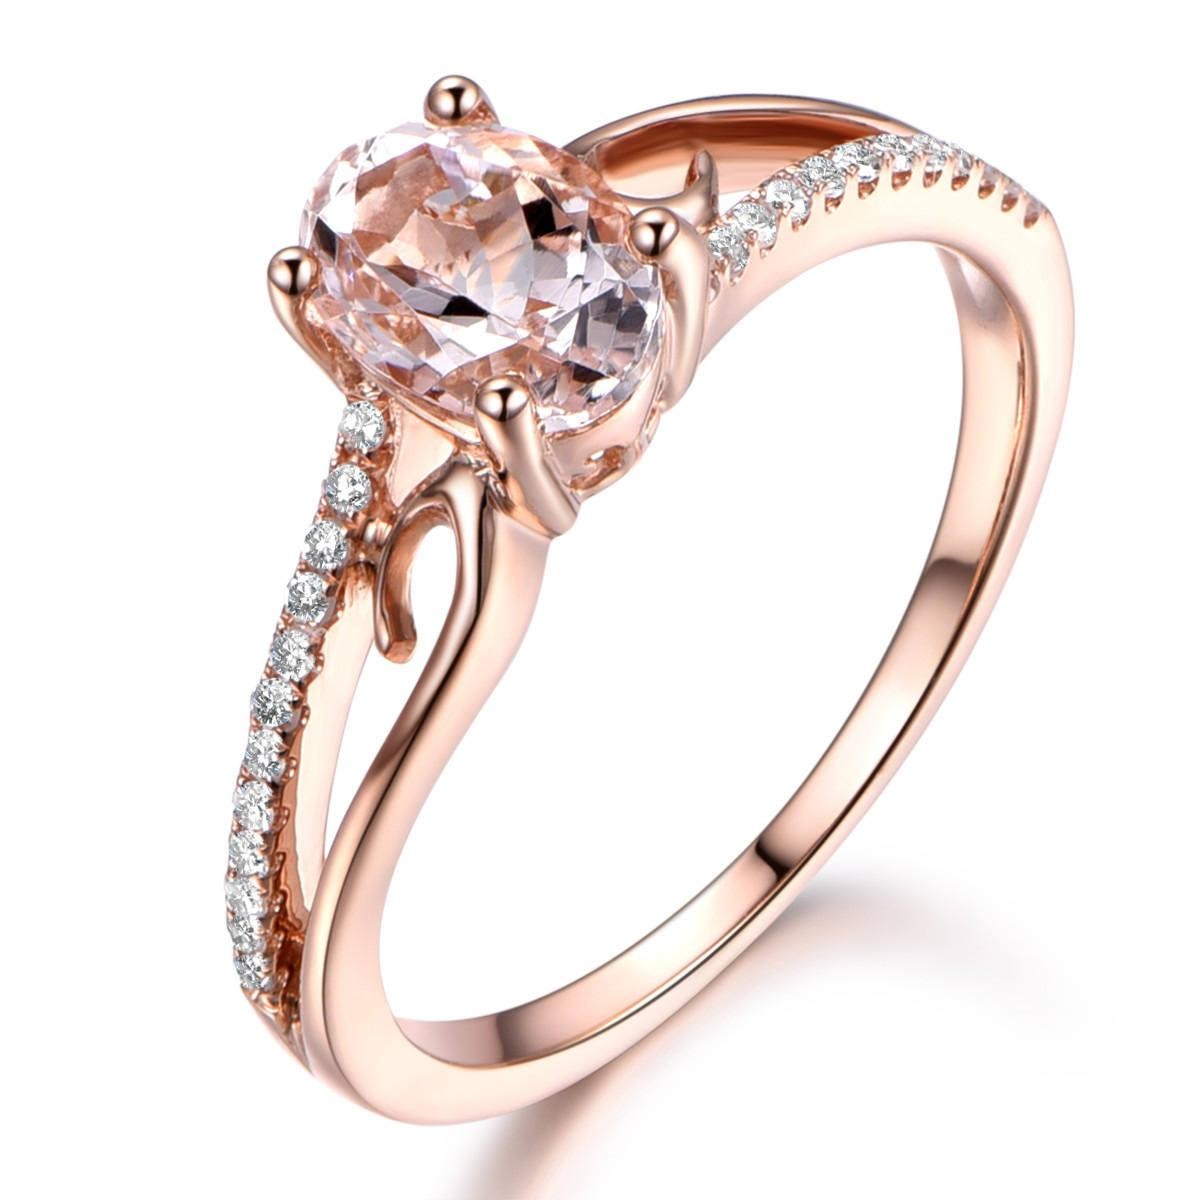 Limited Time Sale: Antique 1.25 Carat Peach Pink Morganite and Diamond Engagement Ring in 10k